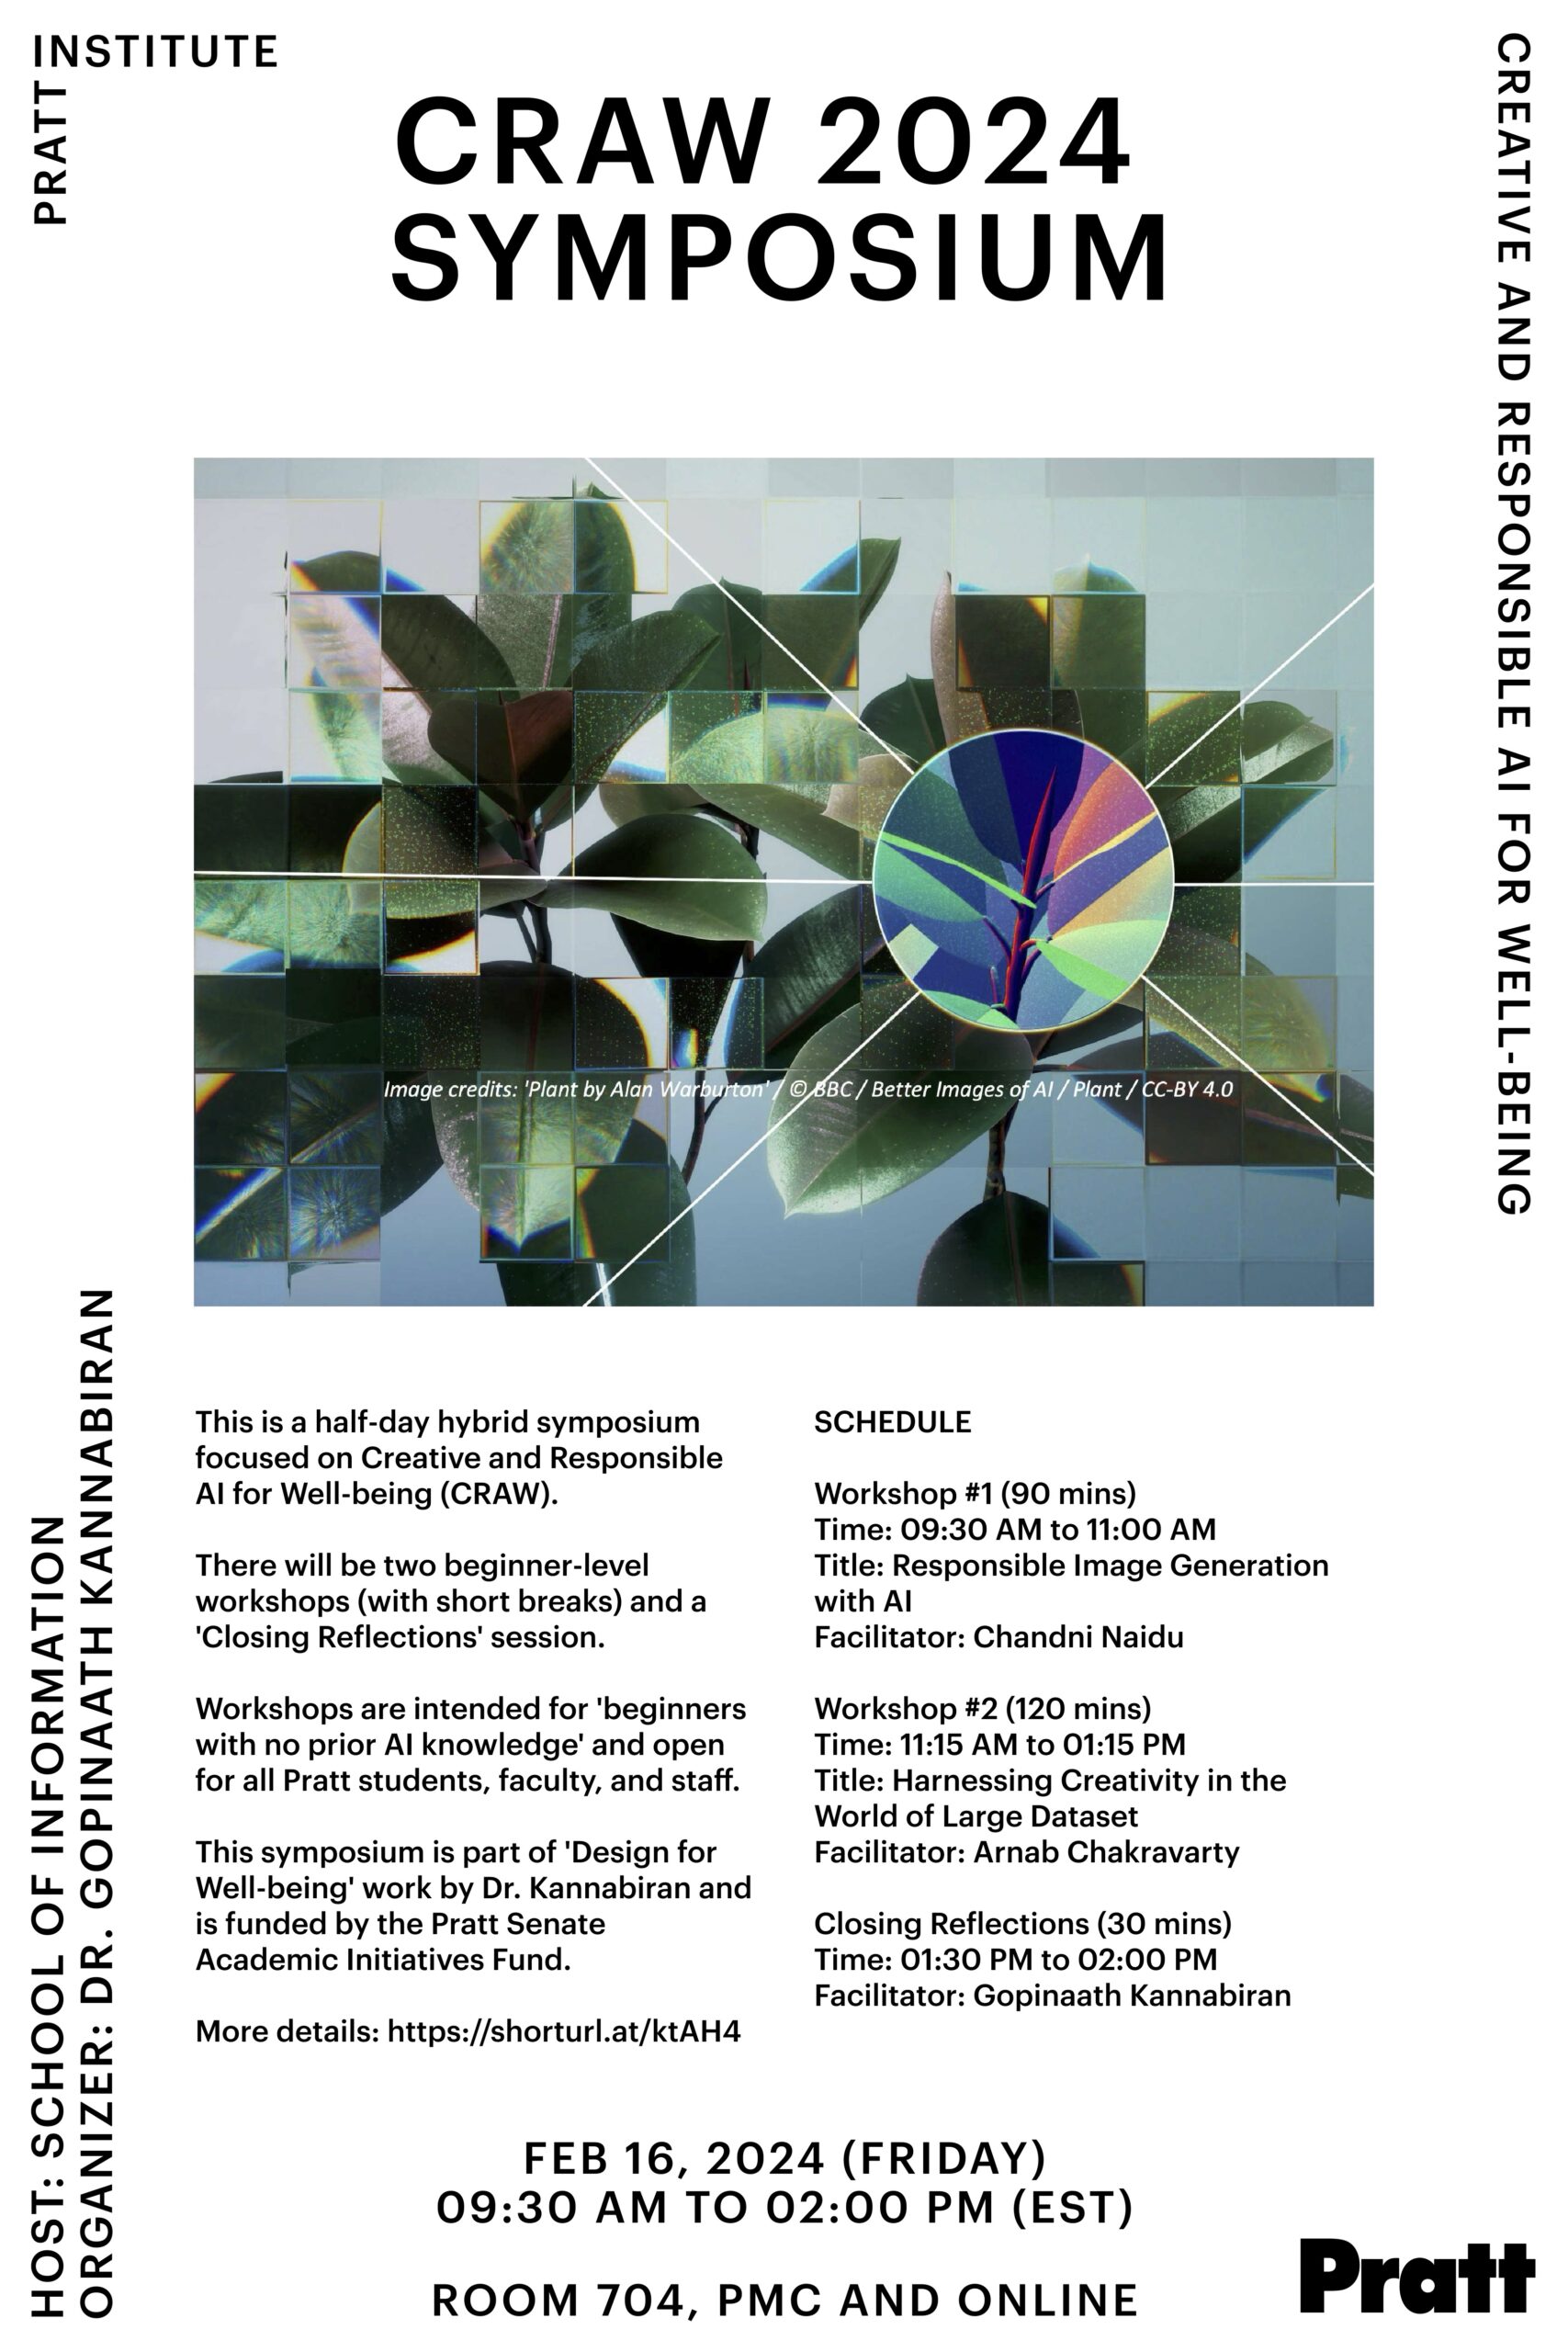 Event poster with event details, and an image of a plant as seen from behind small square glass panels